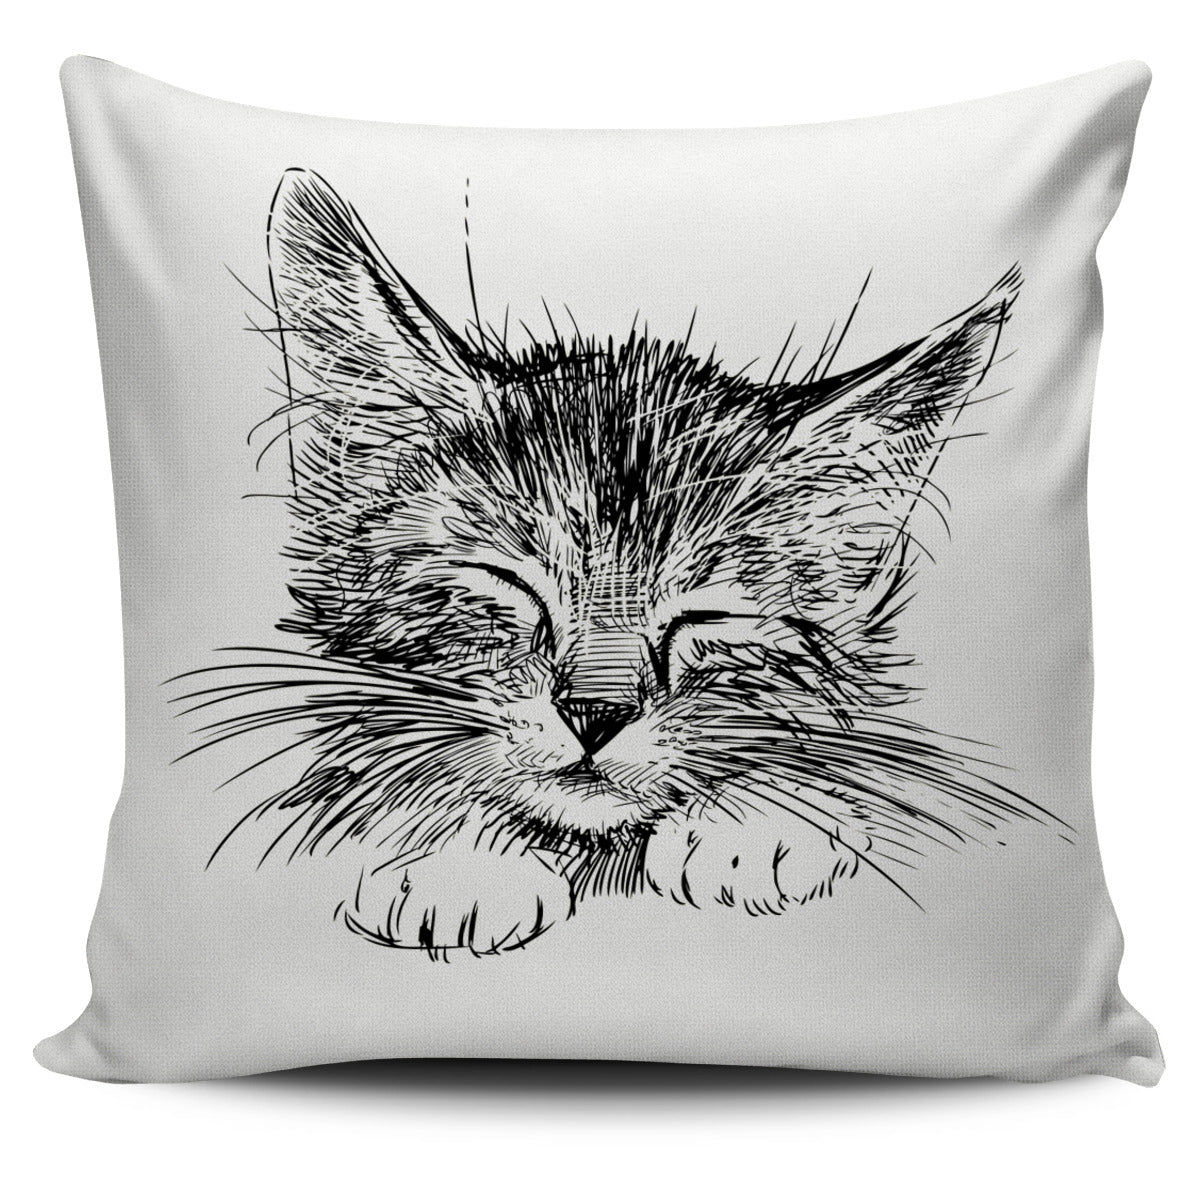 Little Cat Drawing Pillow Cover